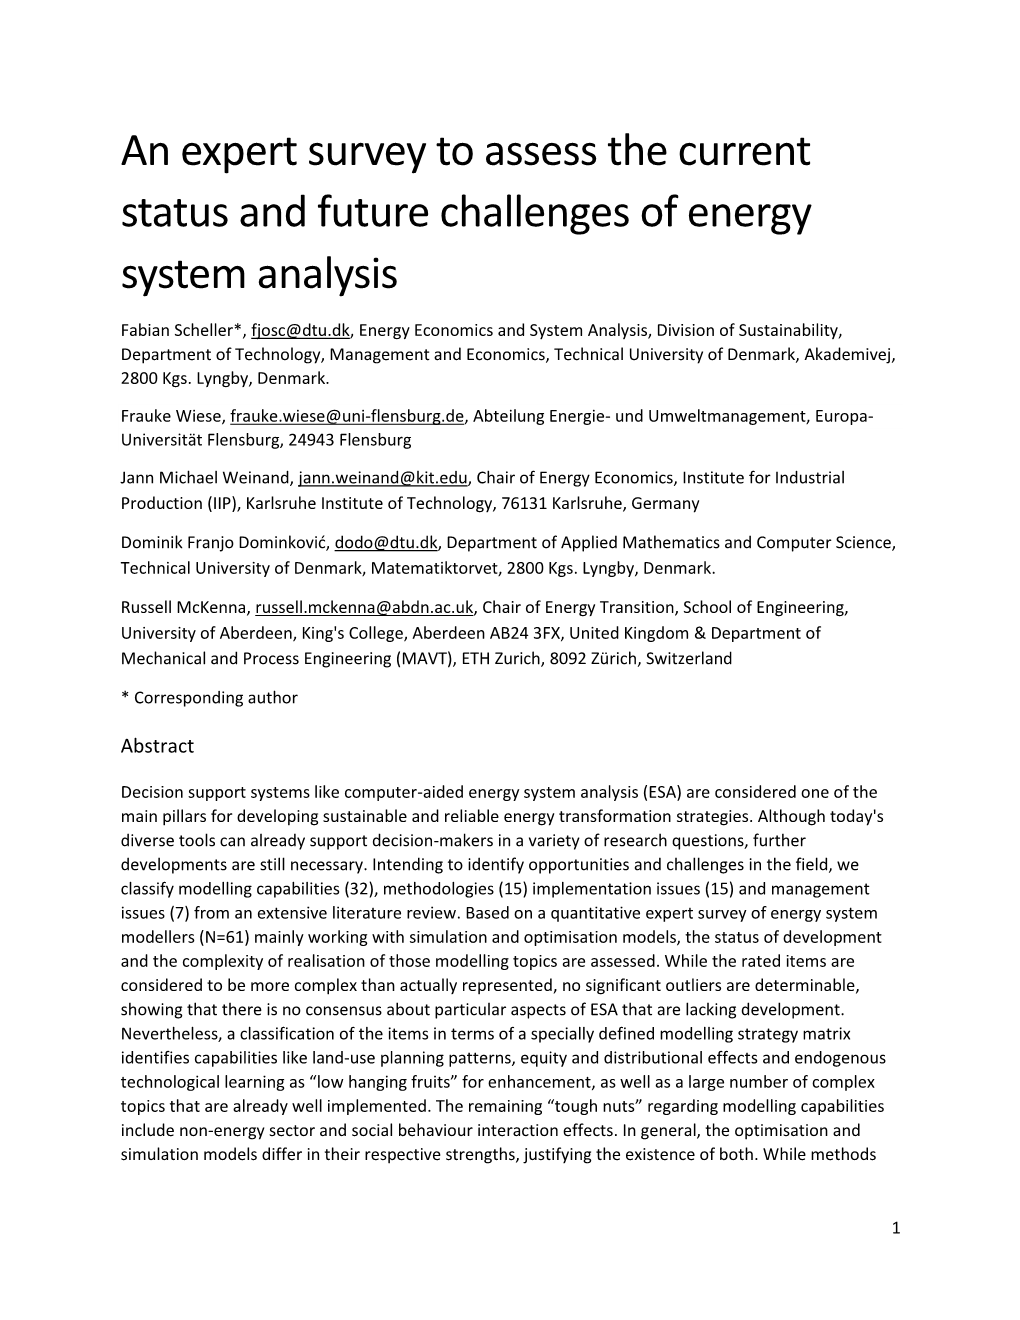 An Expert Survey to Assess the Current Status and Future Challenges of Energy System Analysis